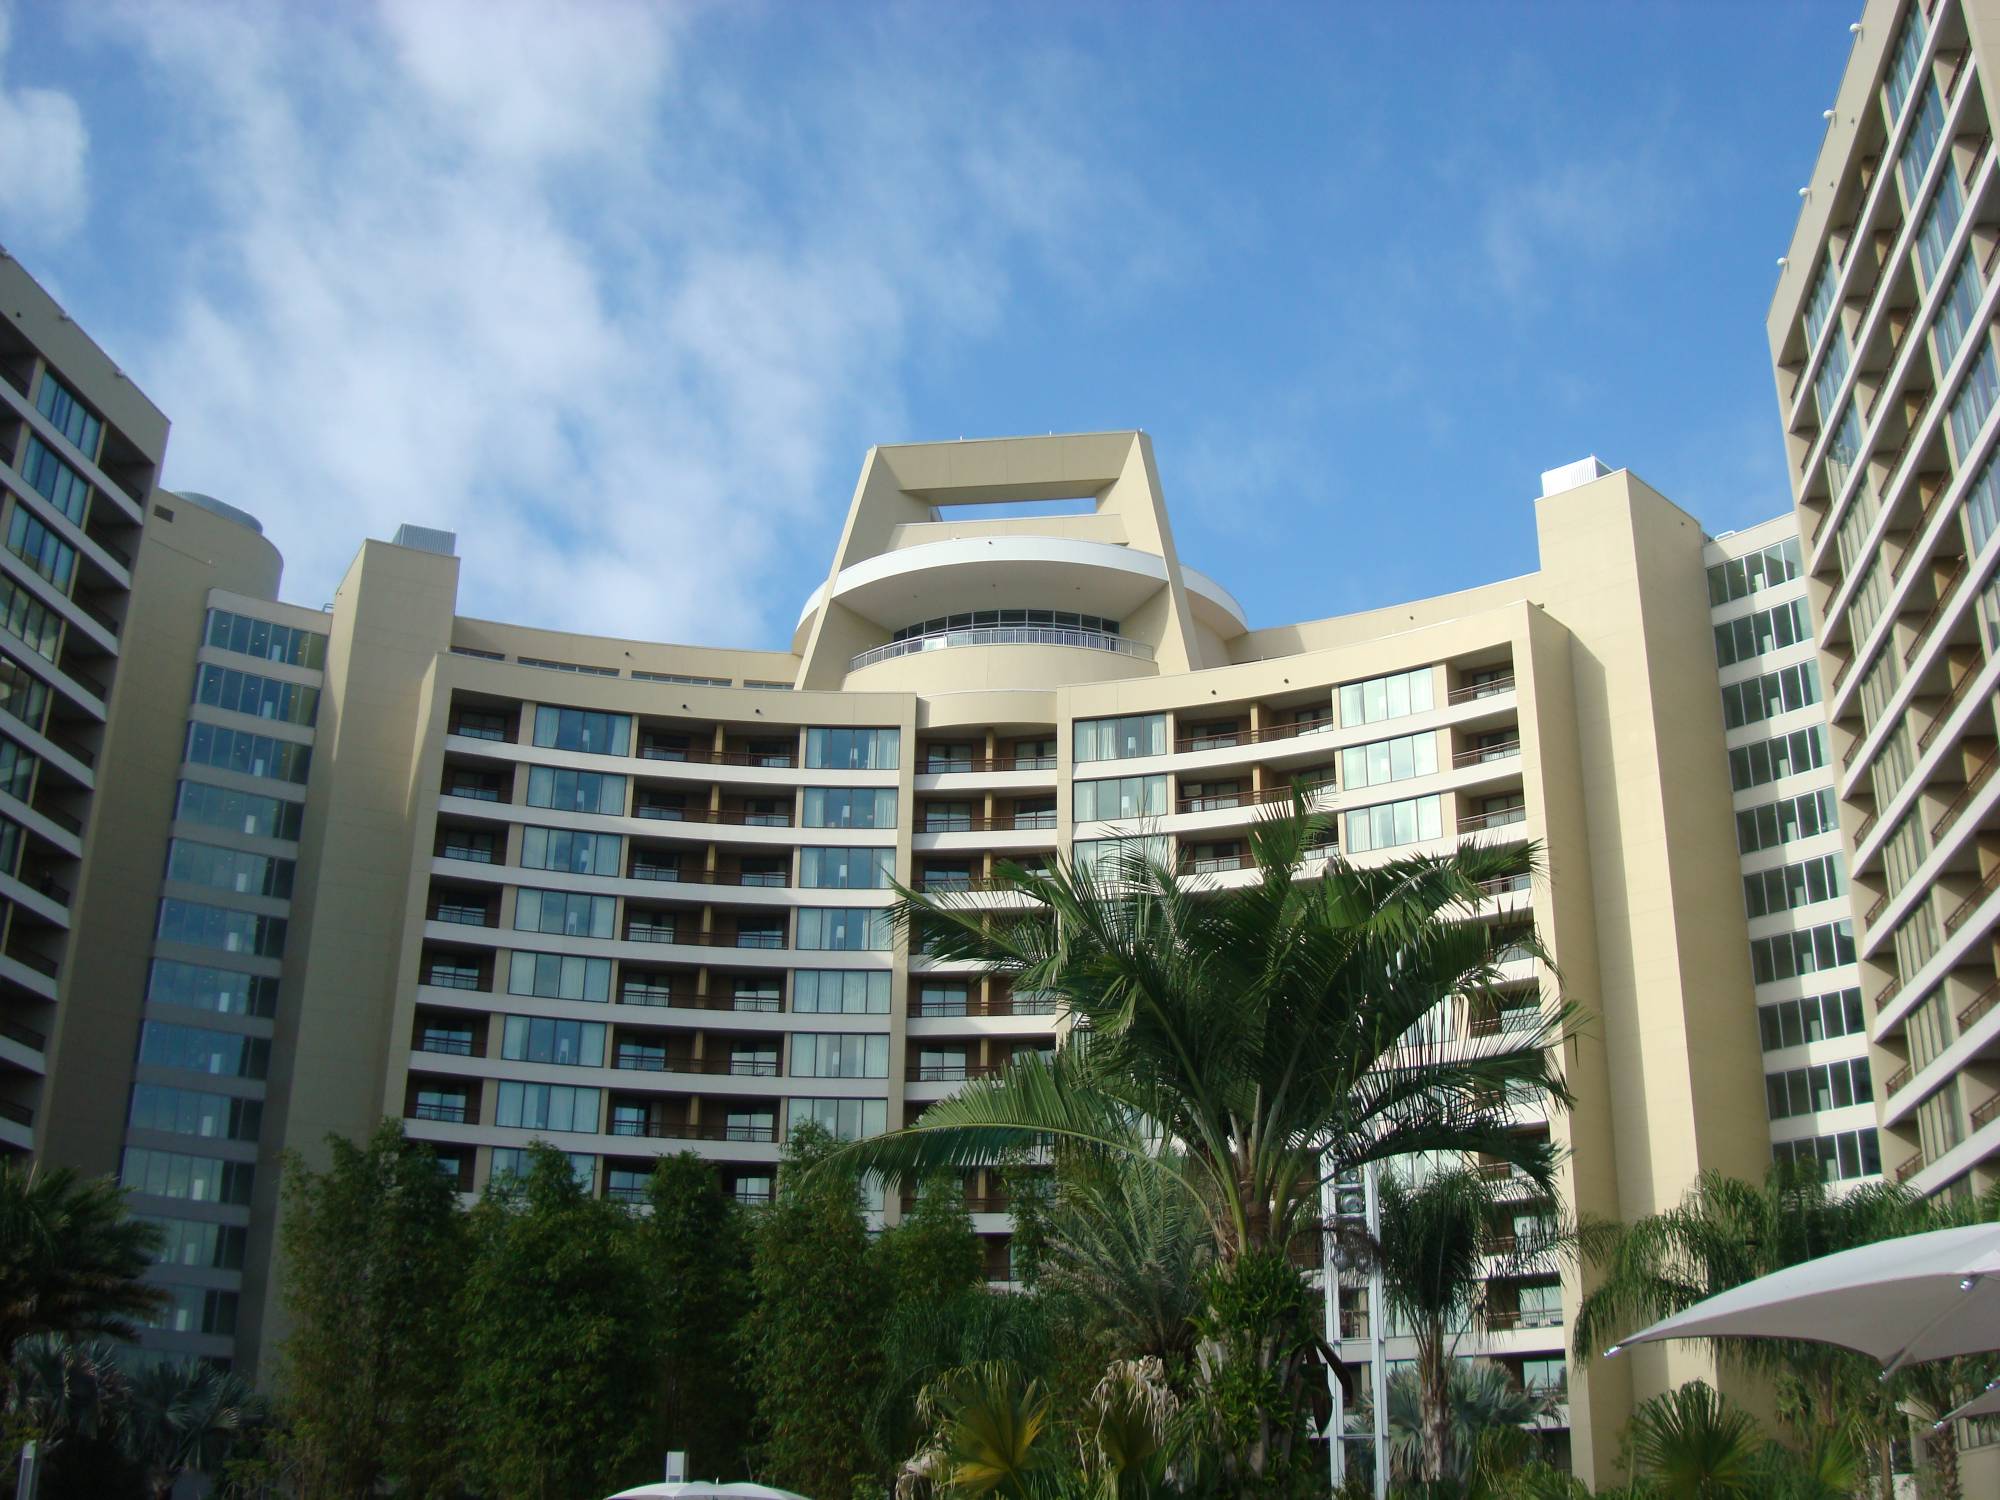 Bay Lake Tower - from Bay Cove Pool